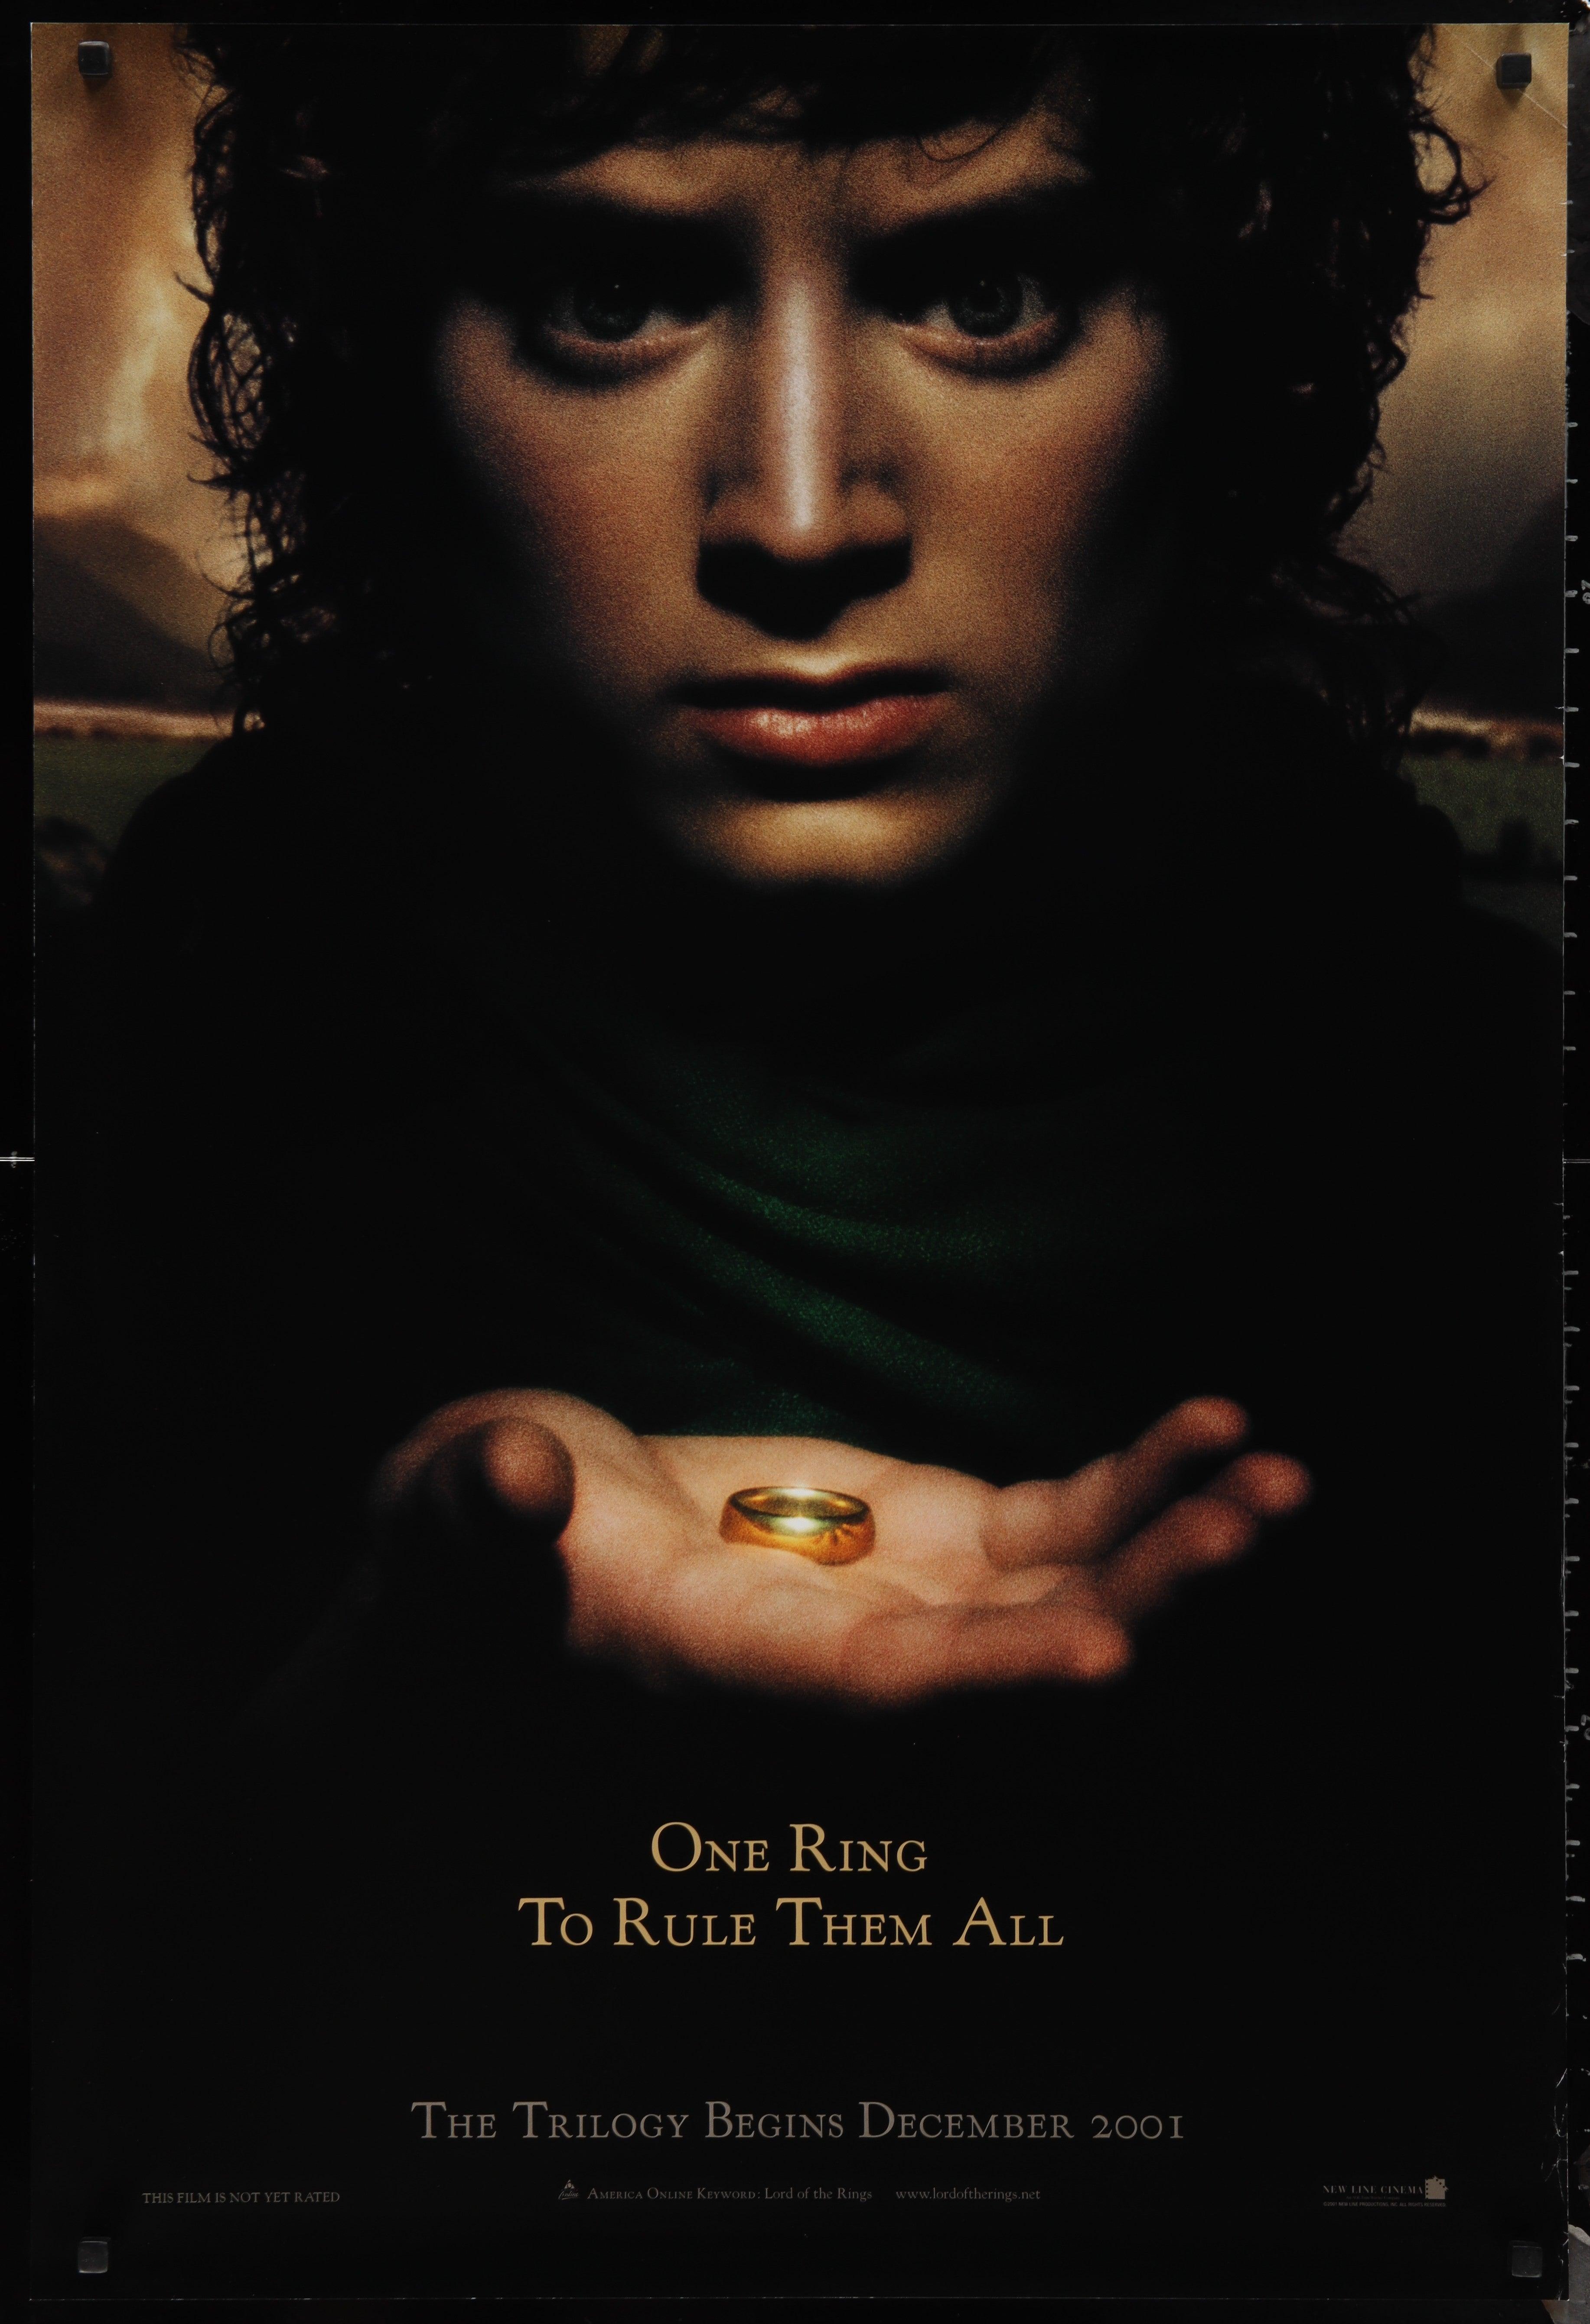 The fellowship of the ring.